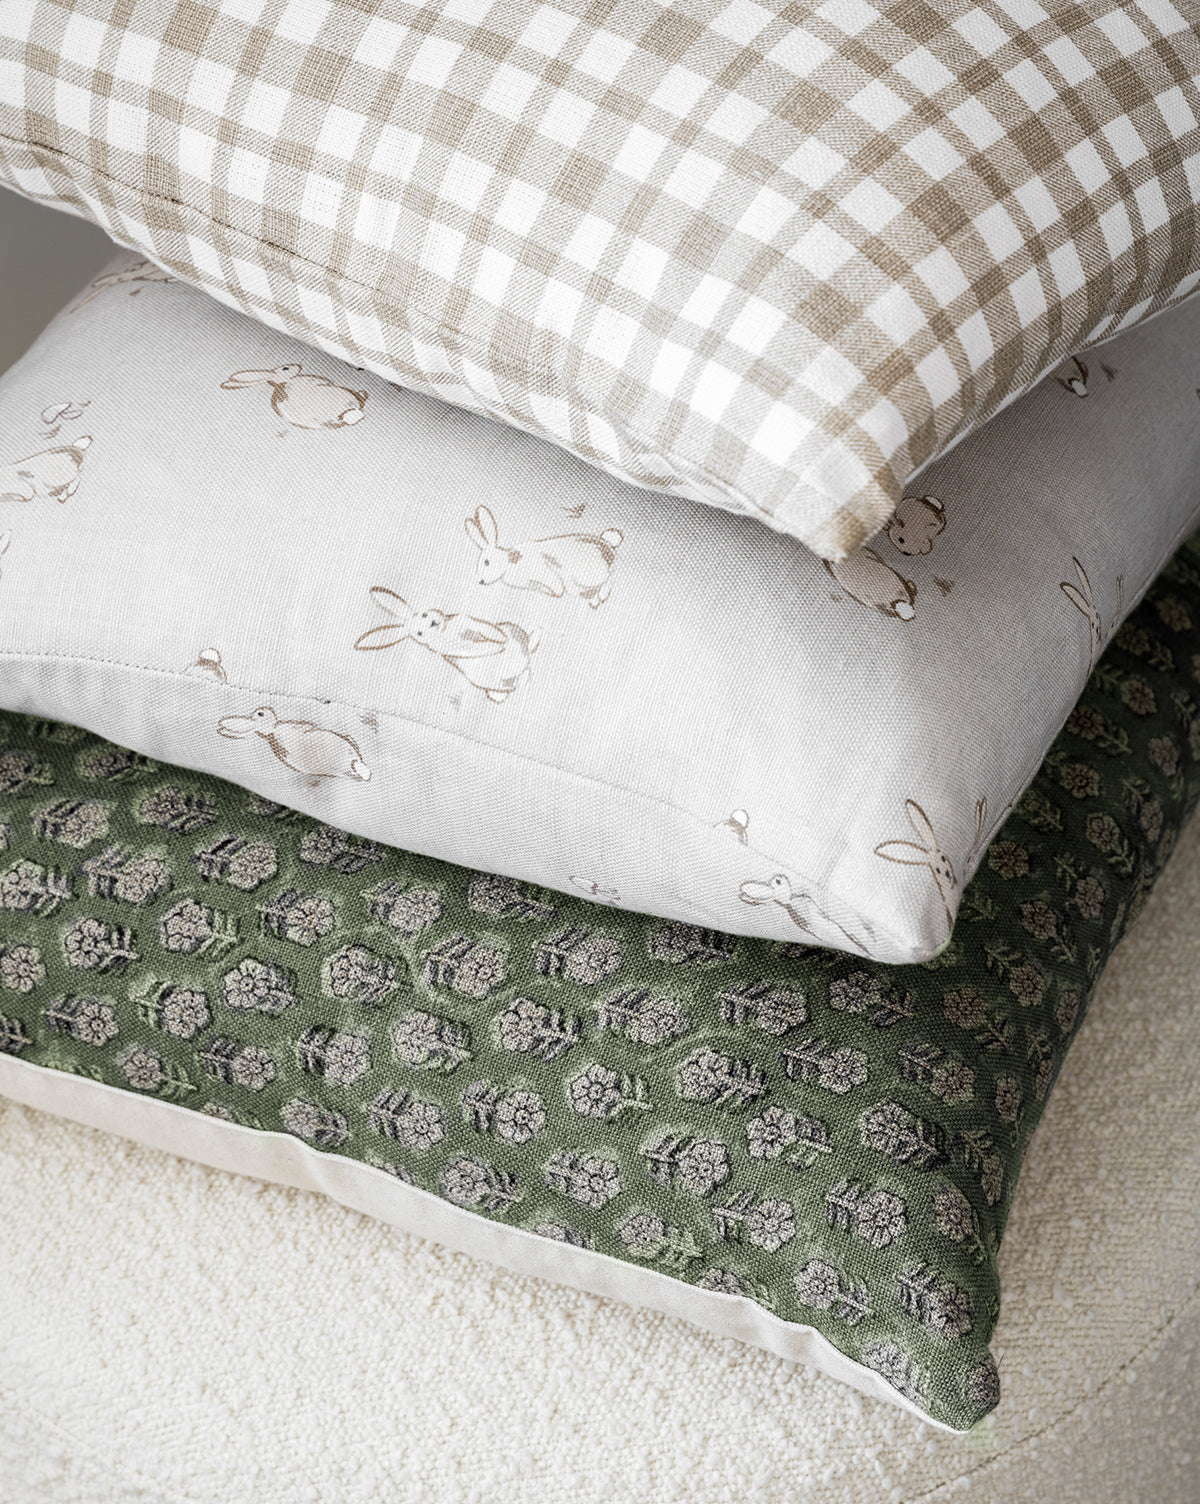 Filling Spaces, Perla Pillow Cover